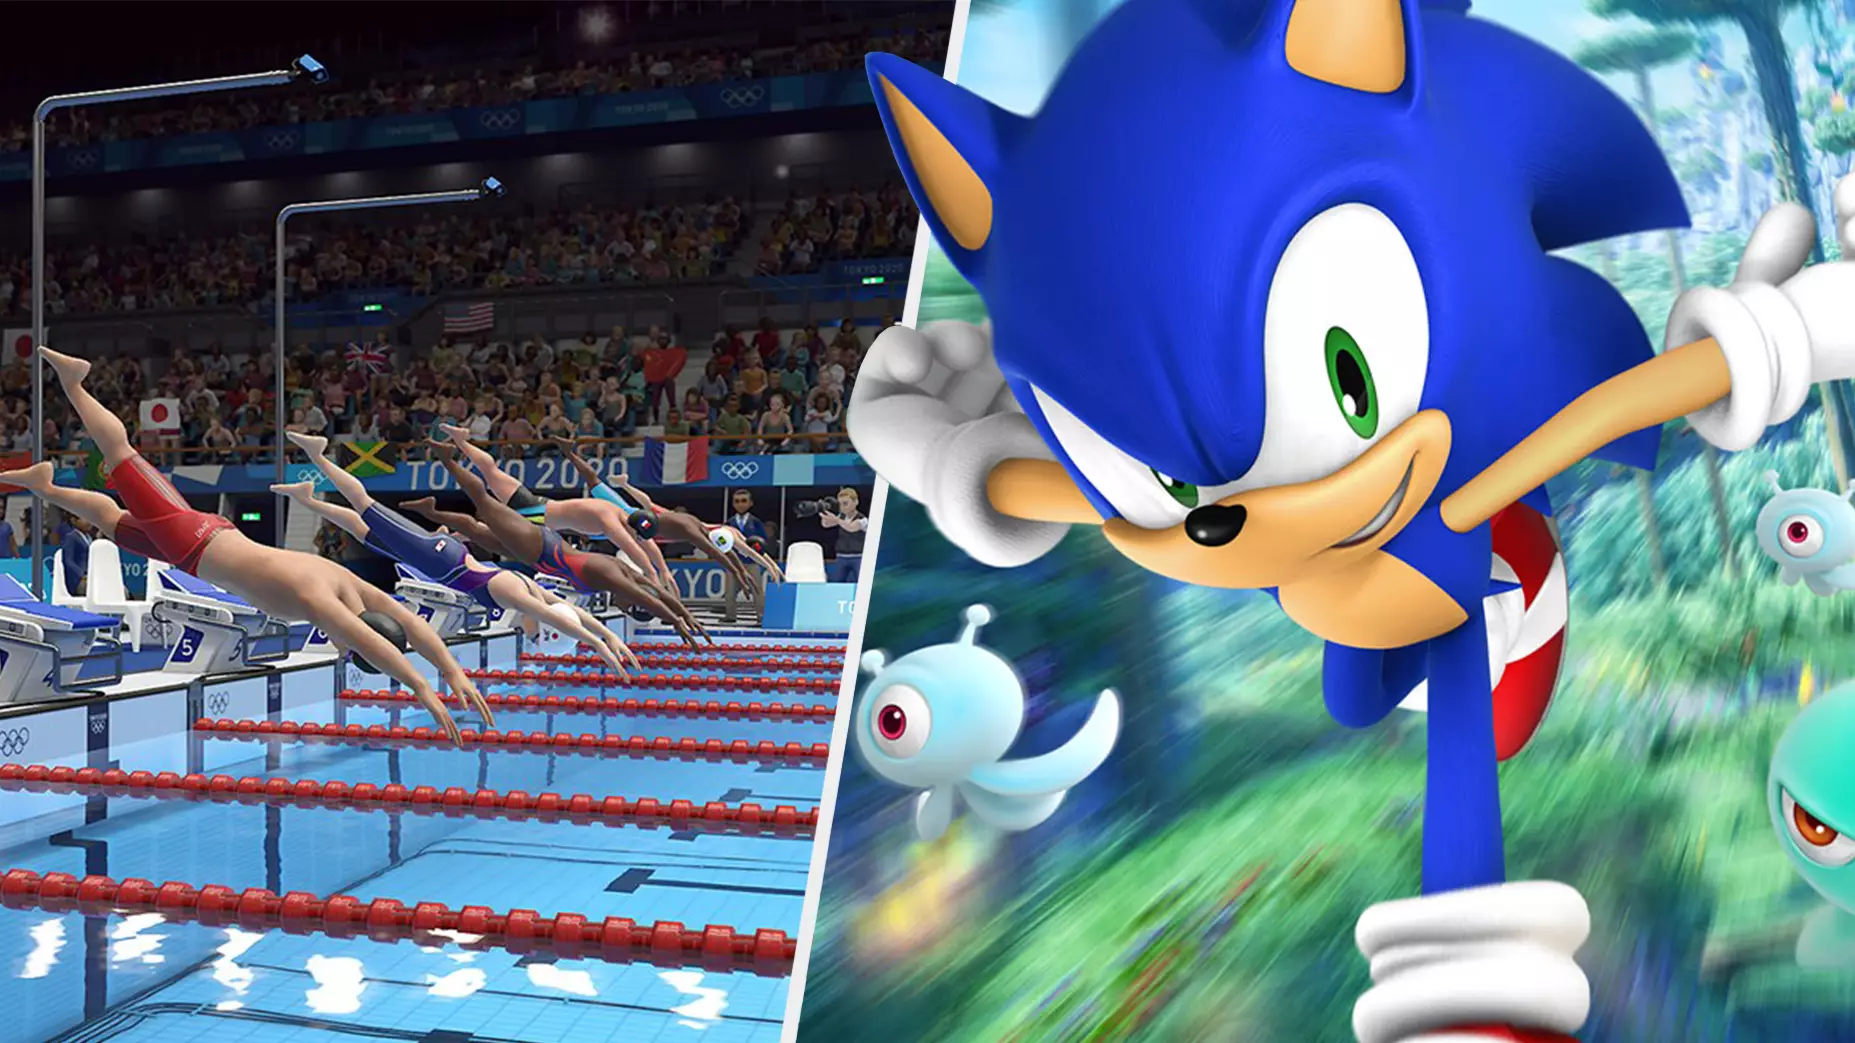 Tokyo Olympic Opening Ceremony Was Set To Iconic Video Game Themes